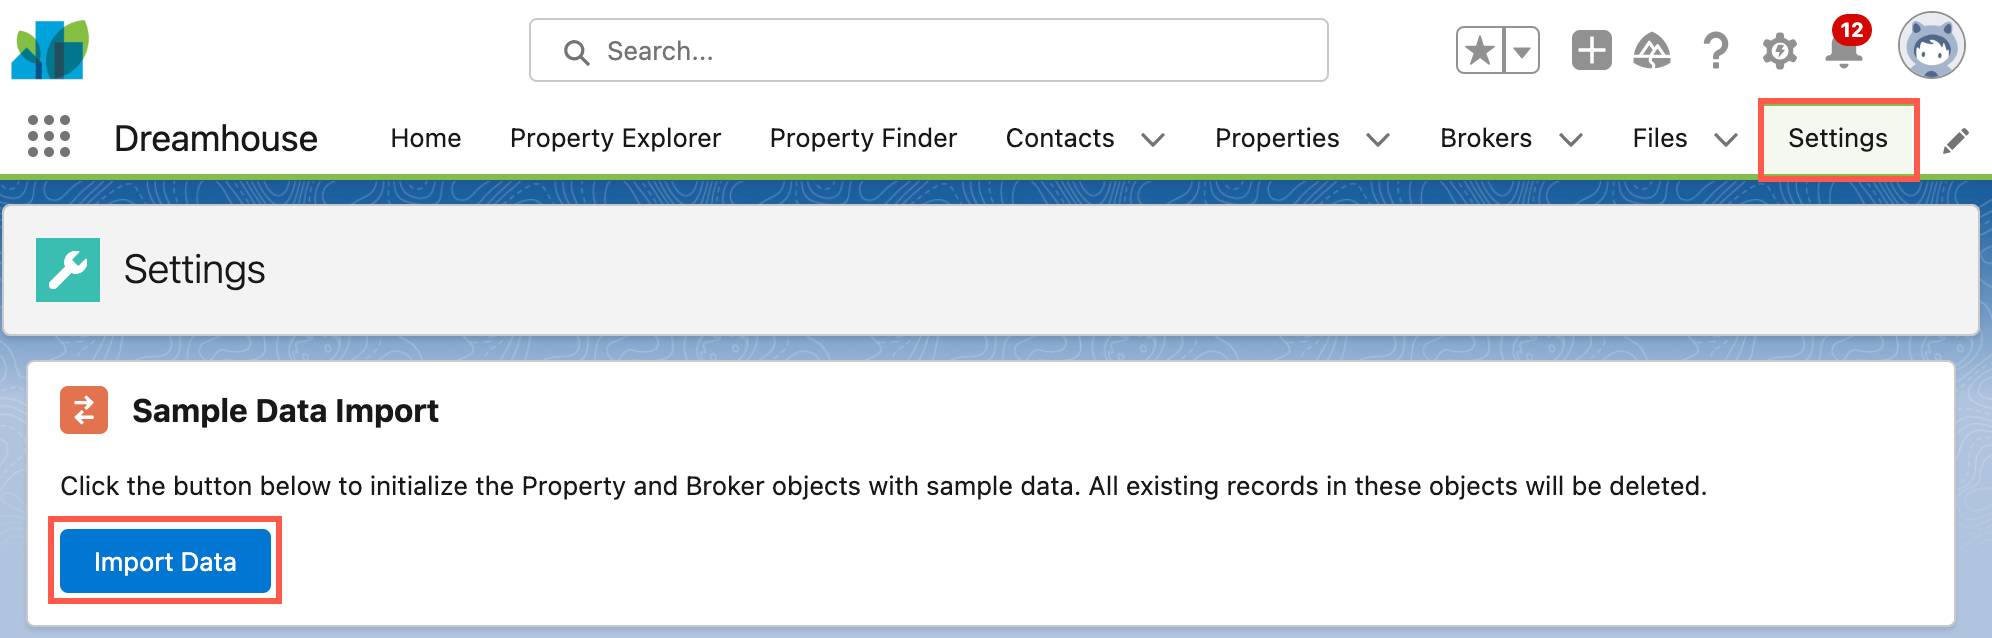 The Dreamhouse Settings tab showing the Import Data button.